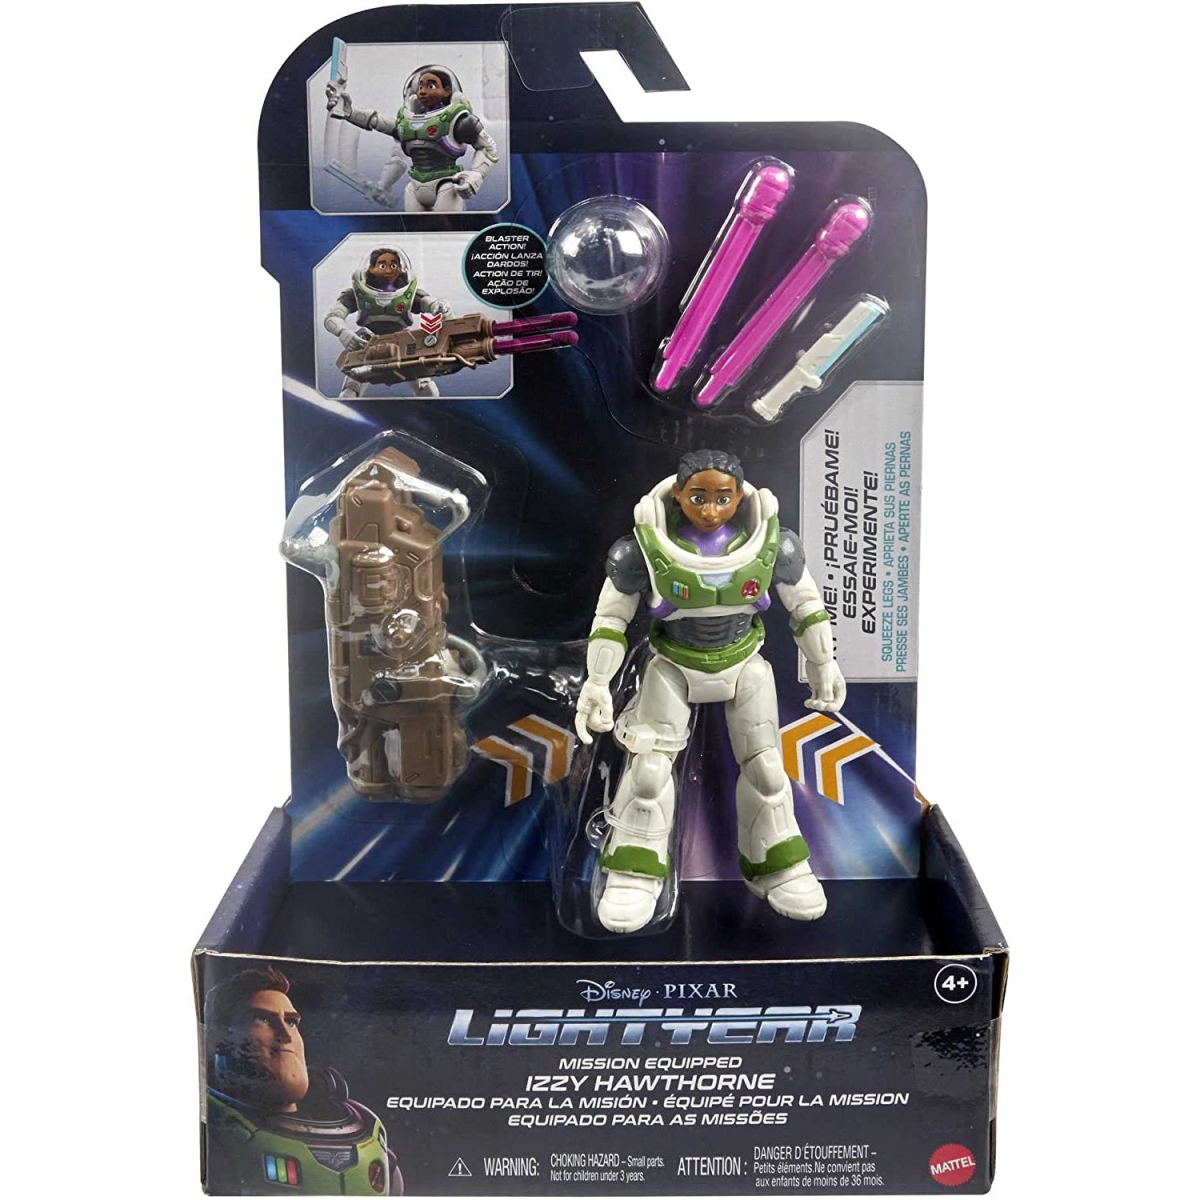 Picture of Lightyear 30393770 6 in. Lightyear Mission Equipped Izzy Hawthorne Figure